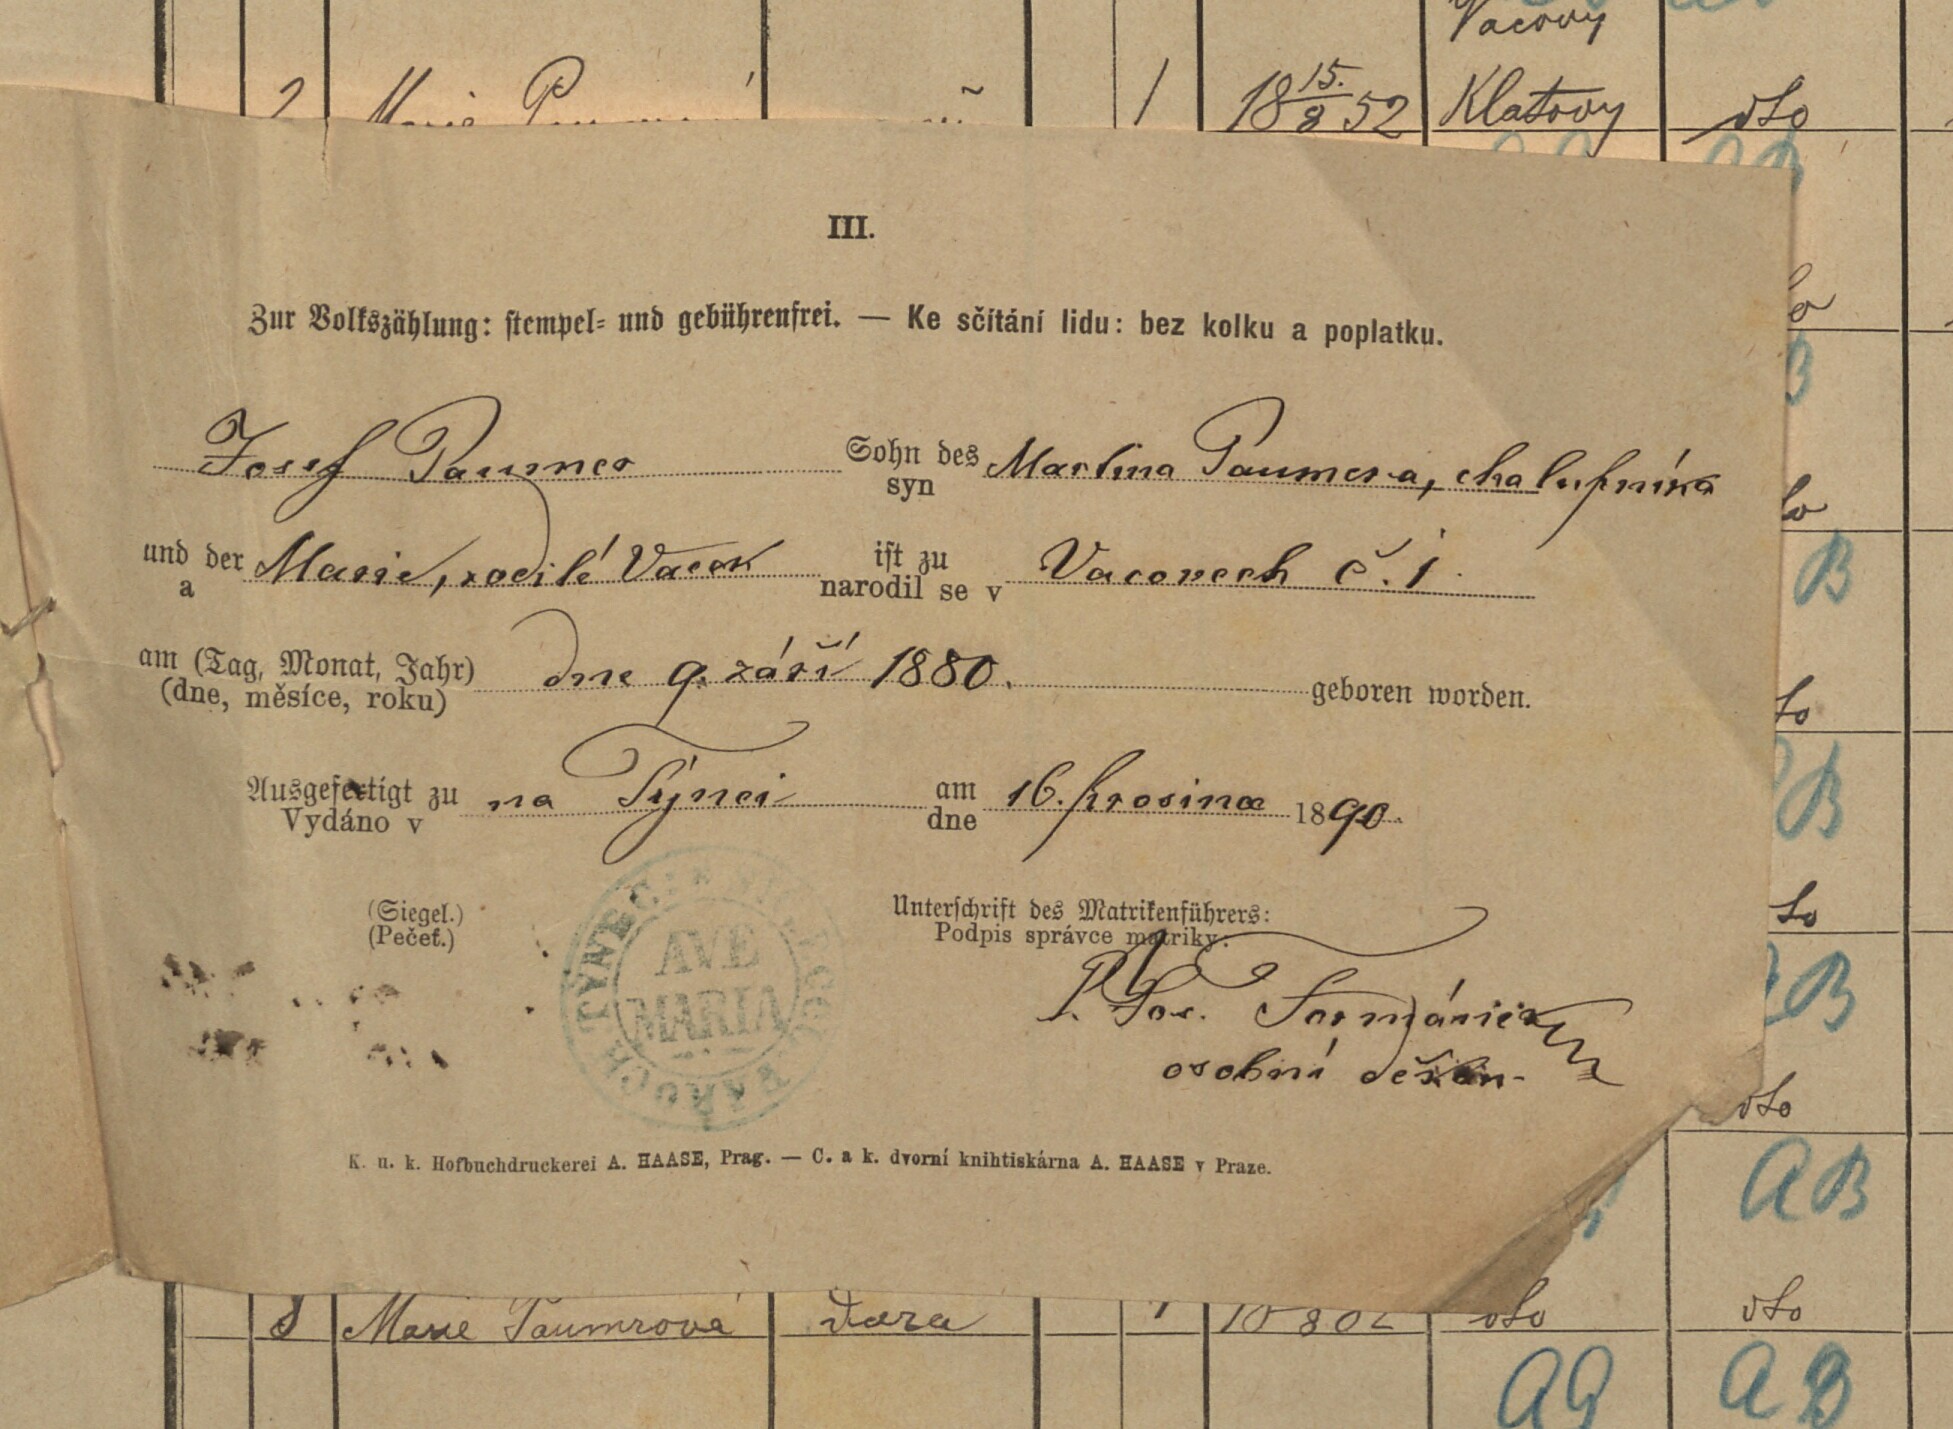 3. soap-kt_01159_census-1890-vacovy-cp001_0030